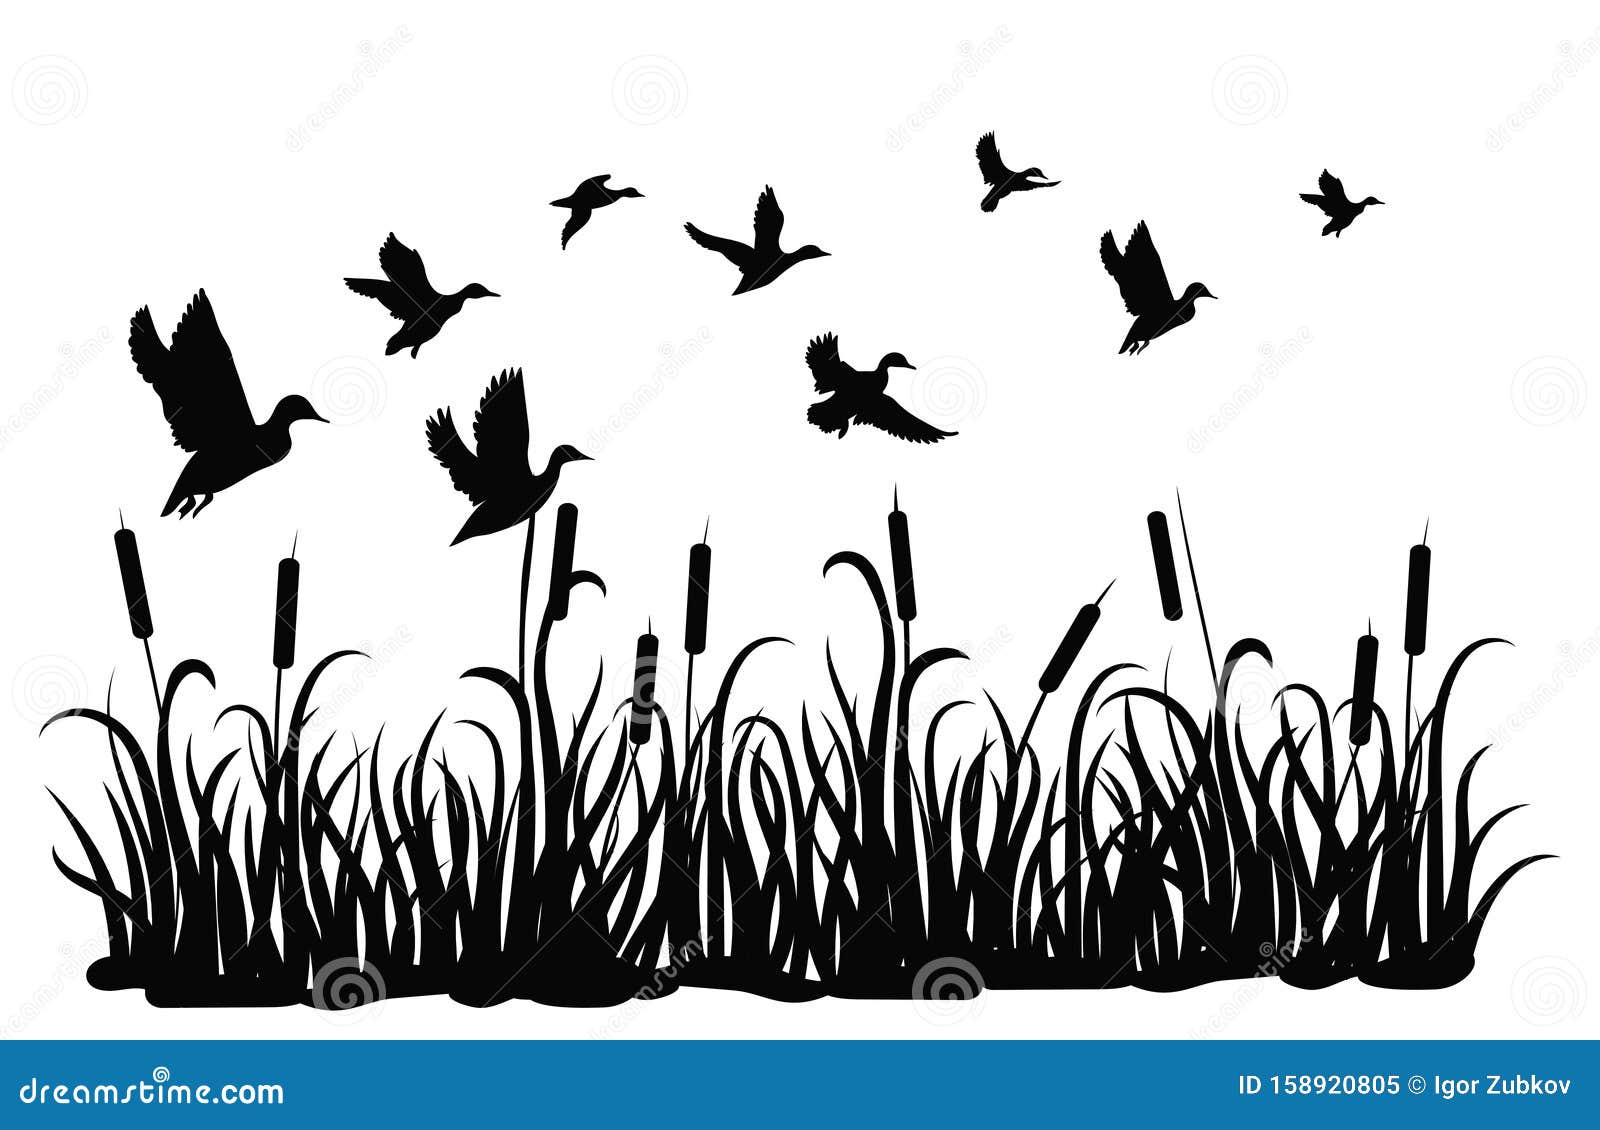 a flock of wild ducks flying over a pond with reeds. black and white  of ducks flying over the river. 